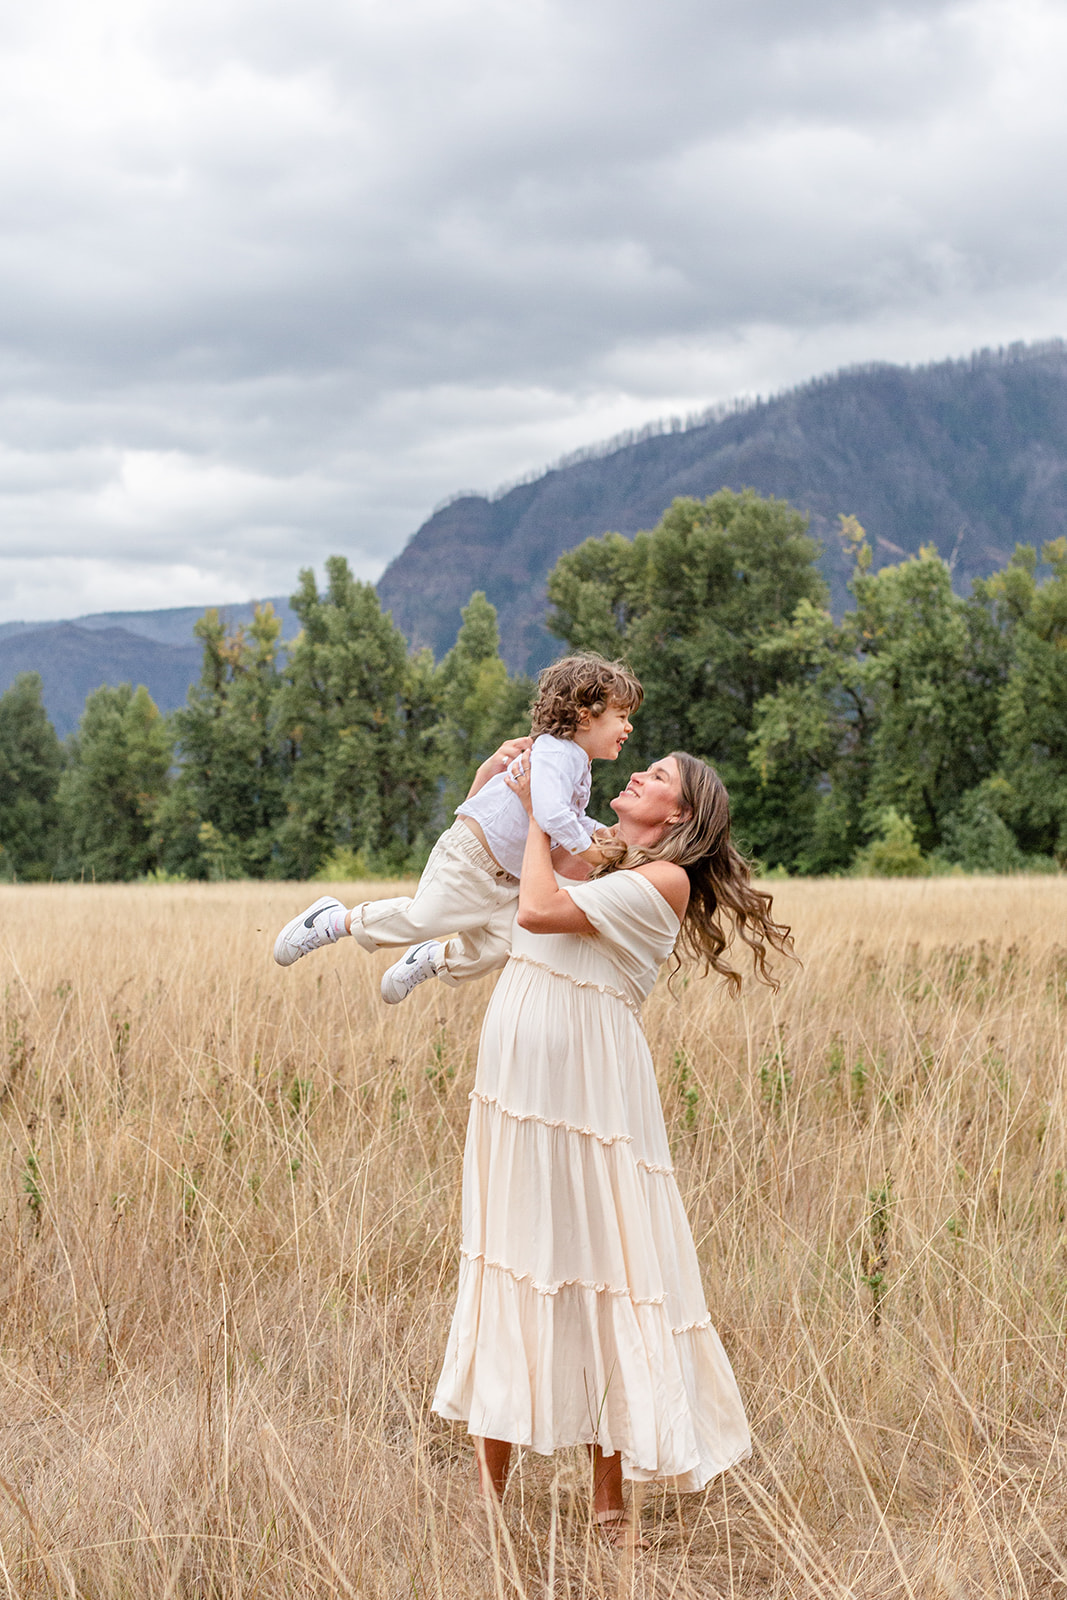 A mother in a white dress spins and dances with her toddler son in a field of tall golden grass after visiting a Portland Pediatric Dentistry